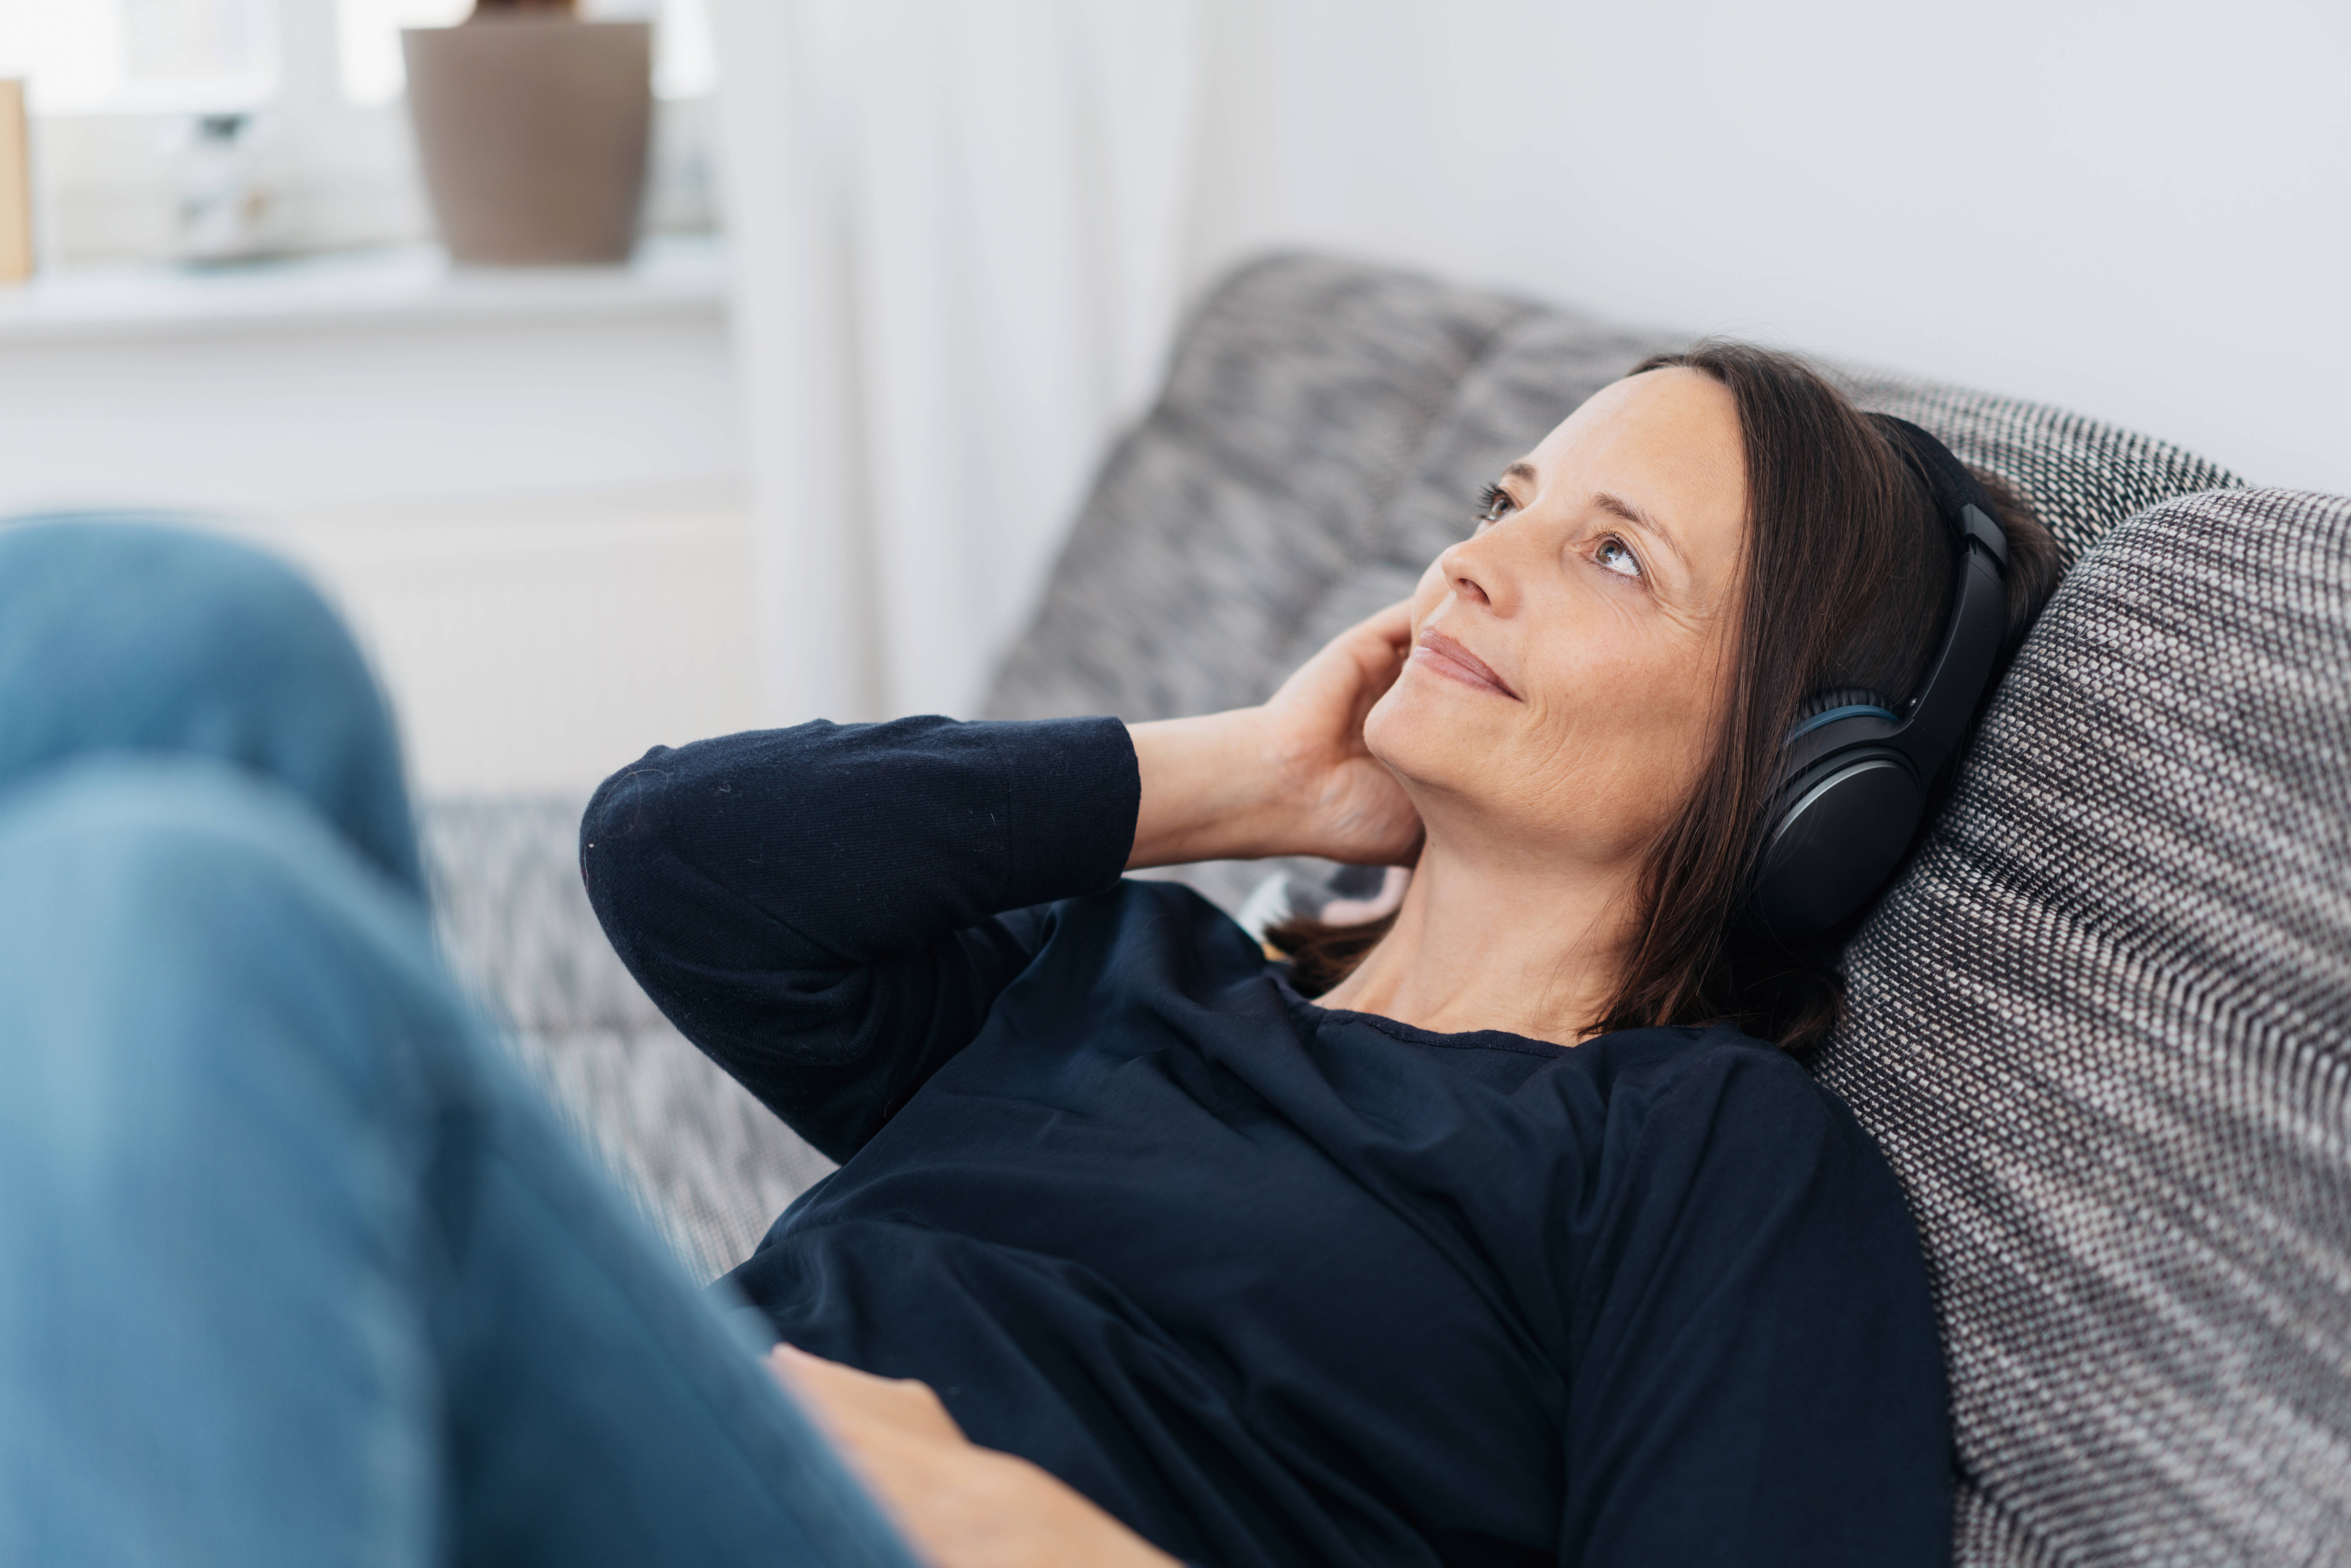 Listen to a podcast at home